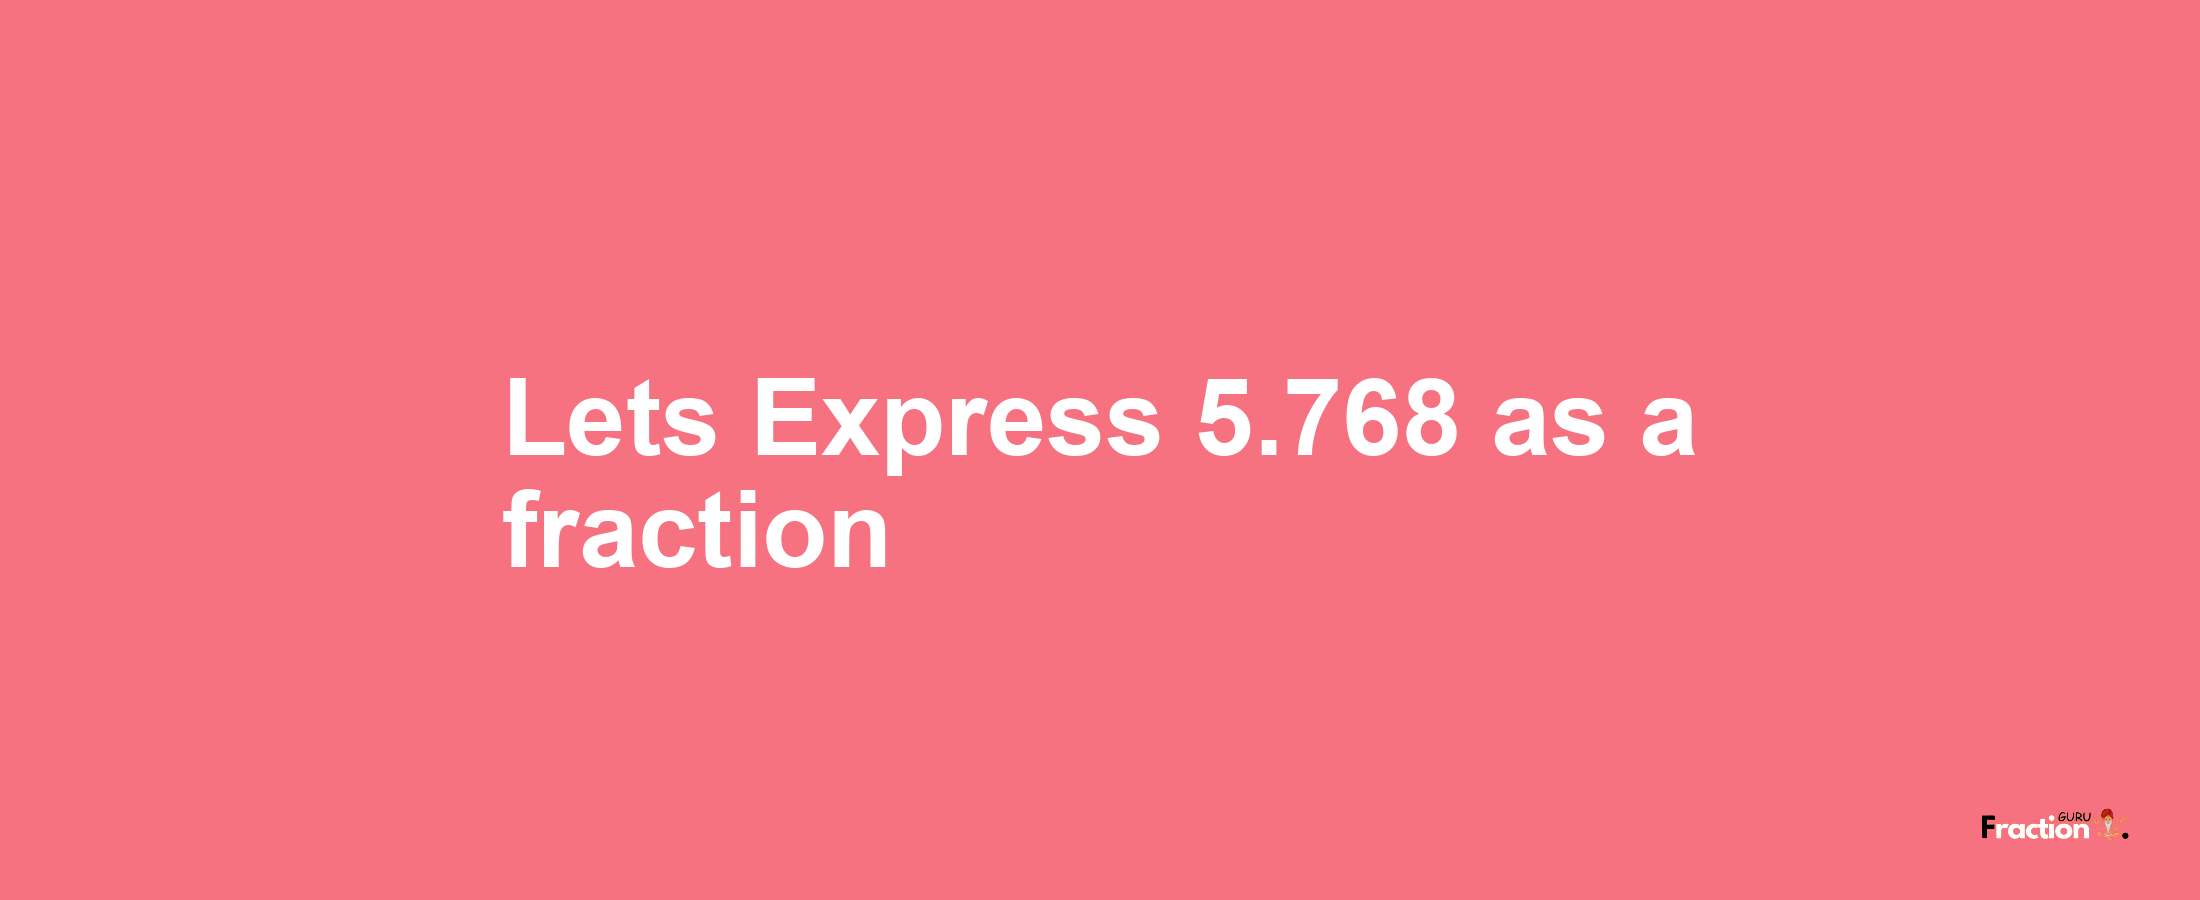 Lets Express 5.768 as afraction